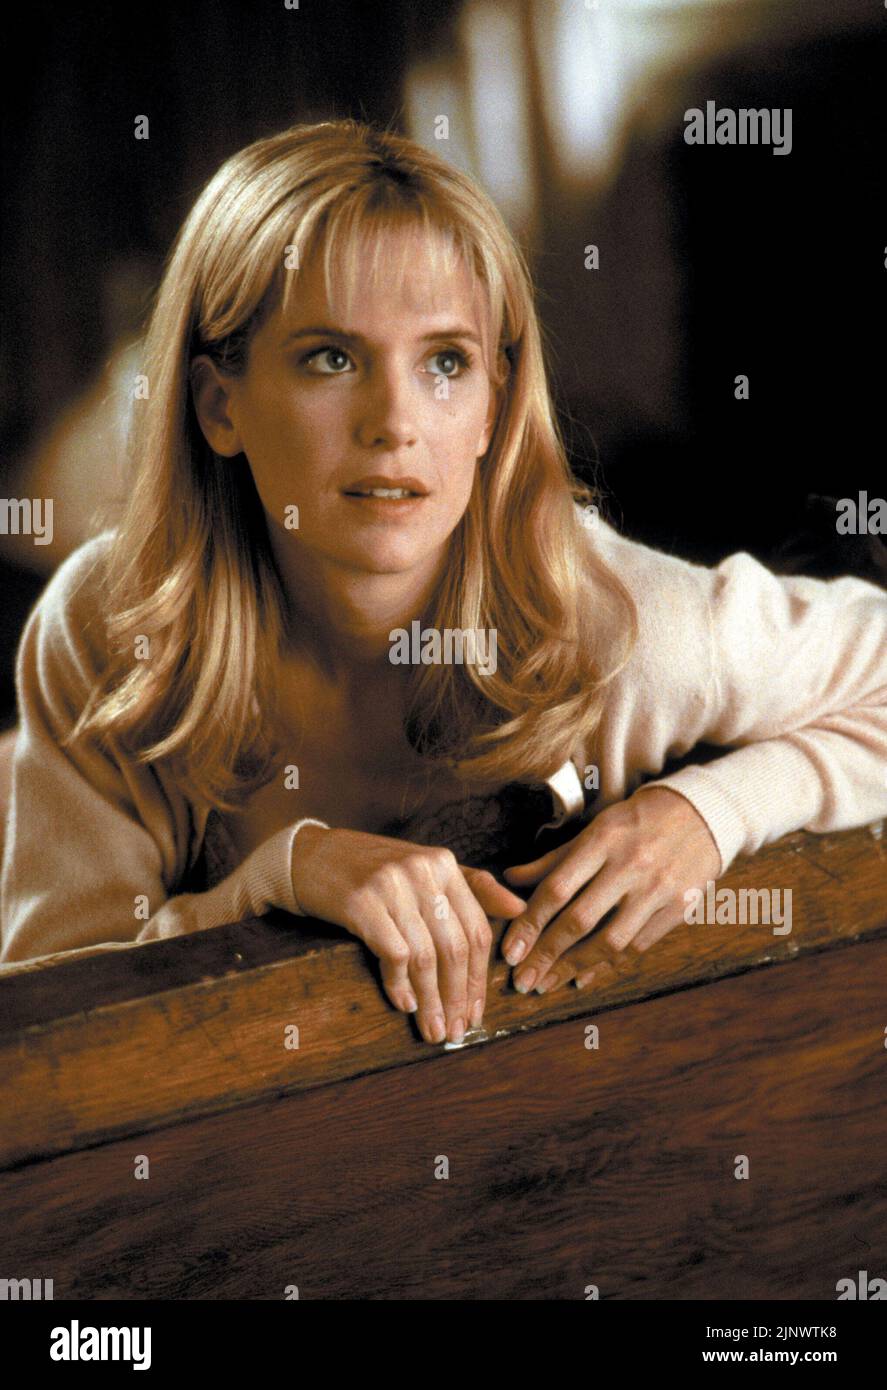 KELLY PRESTON in ADDICTED TO LOVE (1997), directed by GRIFFIN DUNNE. Credit: OUTLAW / Album Stock Photo